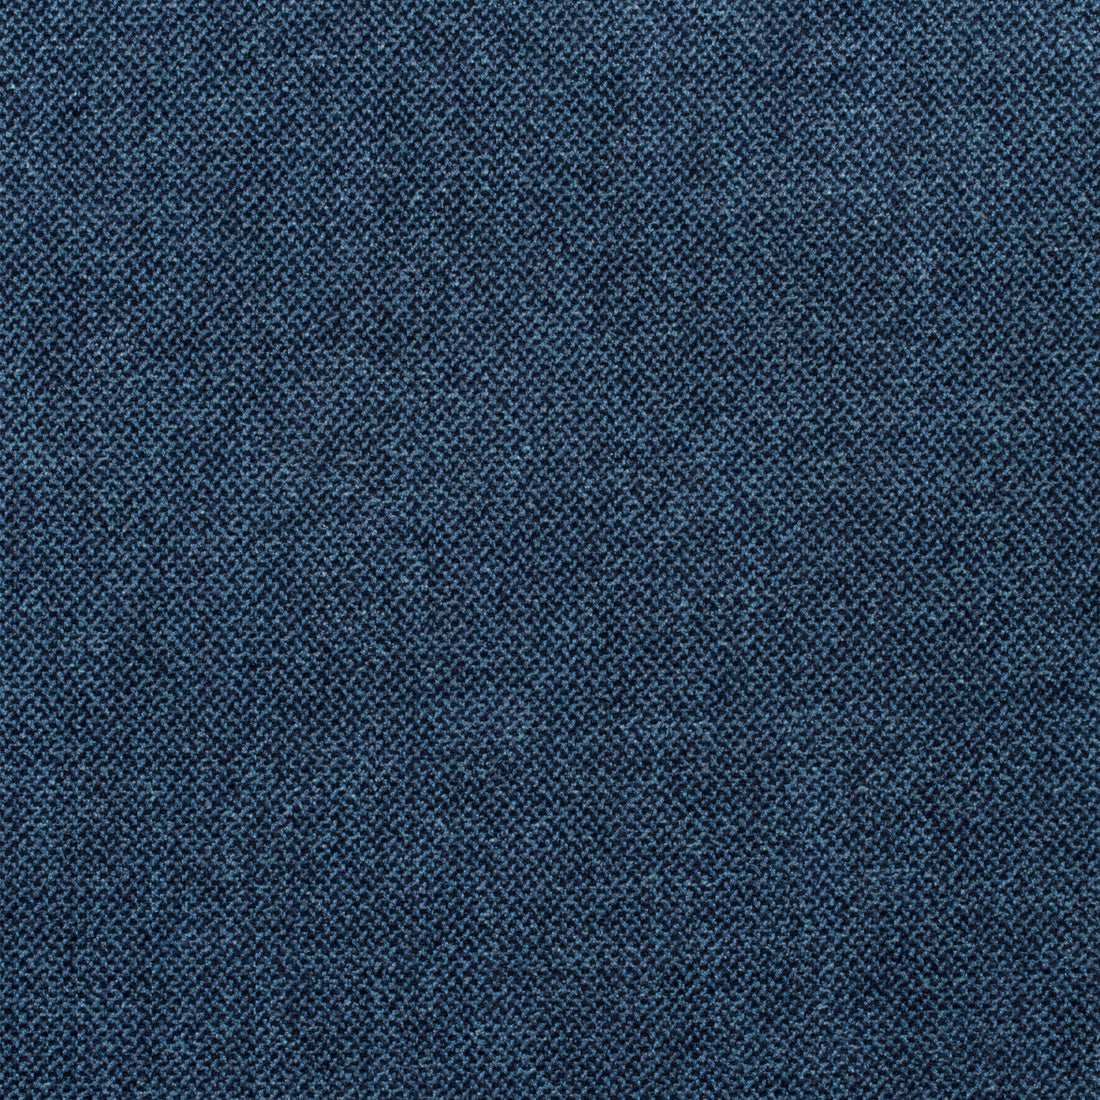 Picco fabric in navy color - pattern number W80708 - by Thibaut in the Woven Resource 11: Rialto collection